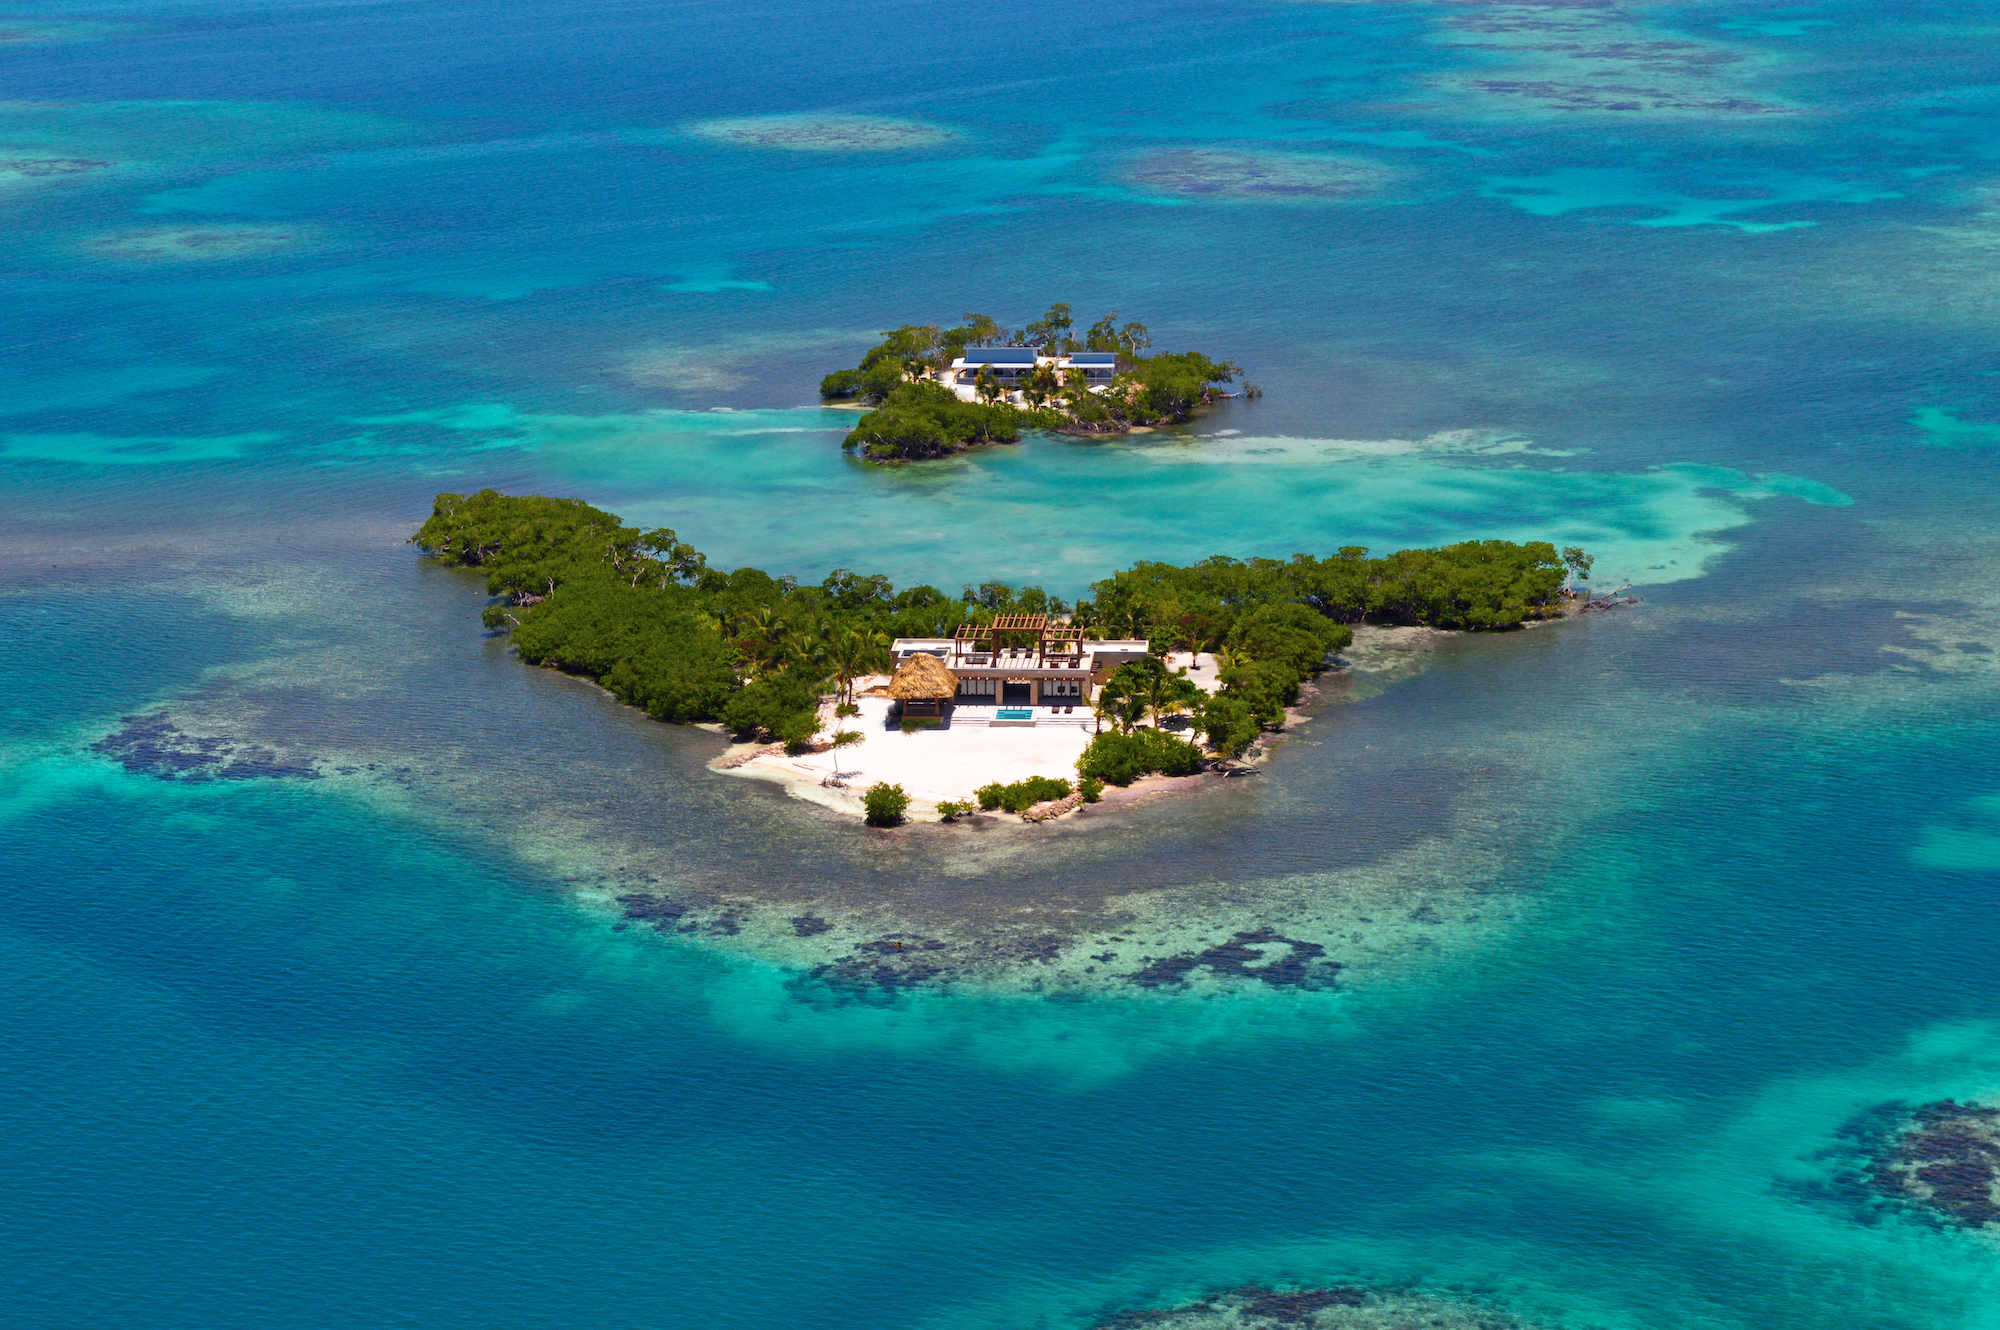 Upgrade Isolation: The 12 Most Secluded Remote Islands And Private Hotels